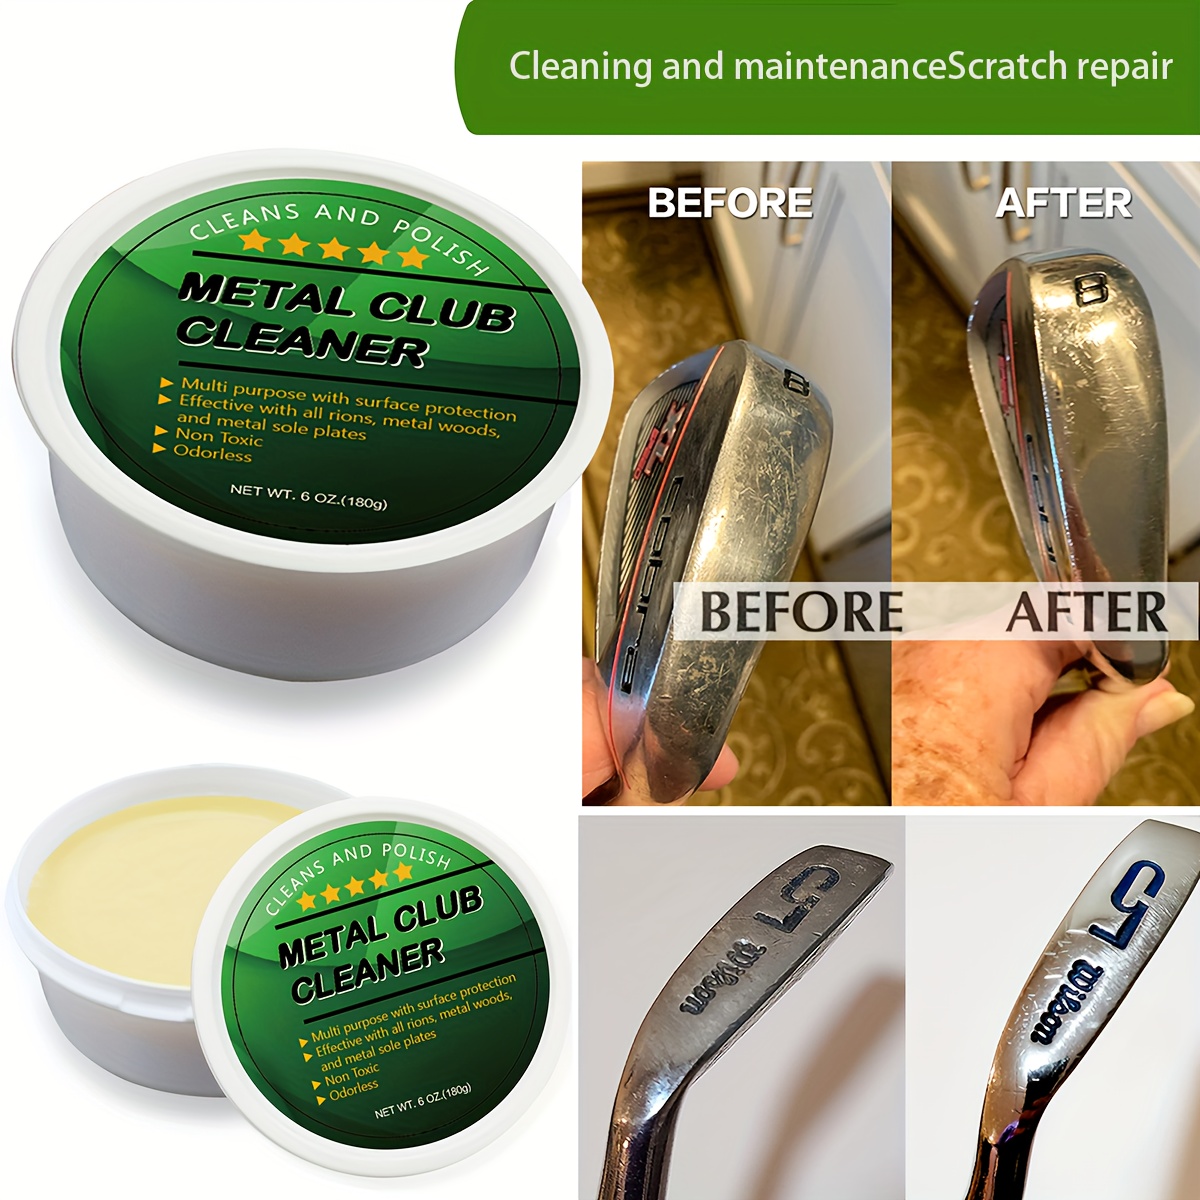 How to Polish Golf clubs at Home  Best Way Clean Polish Golf Clubs 